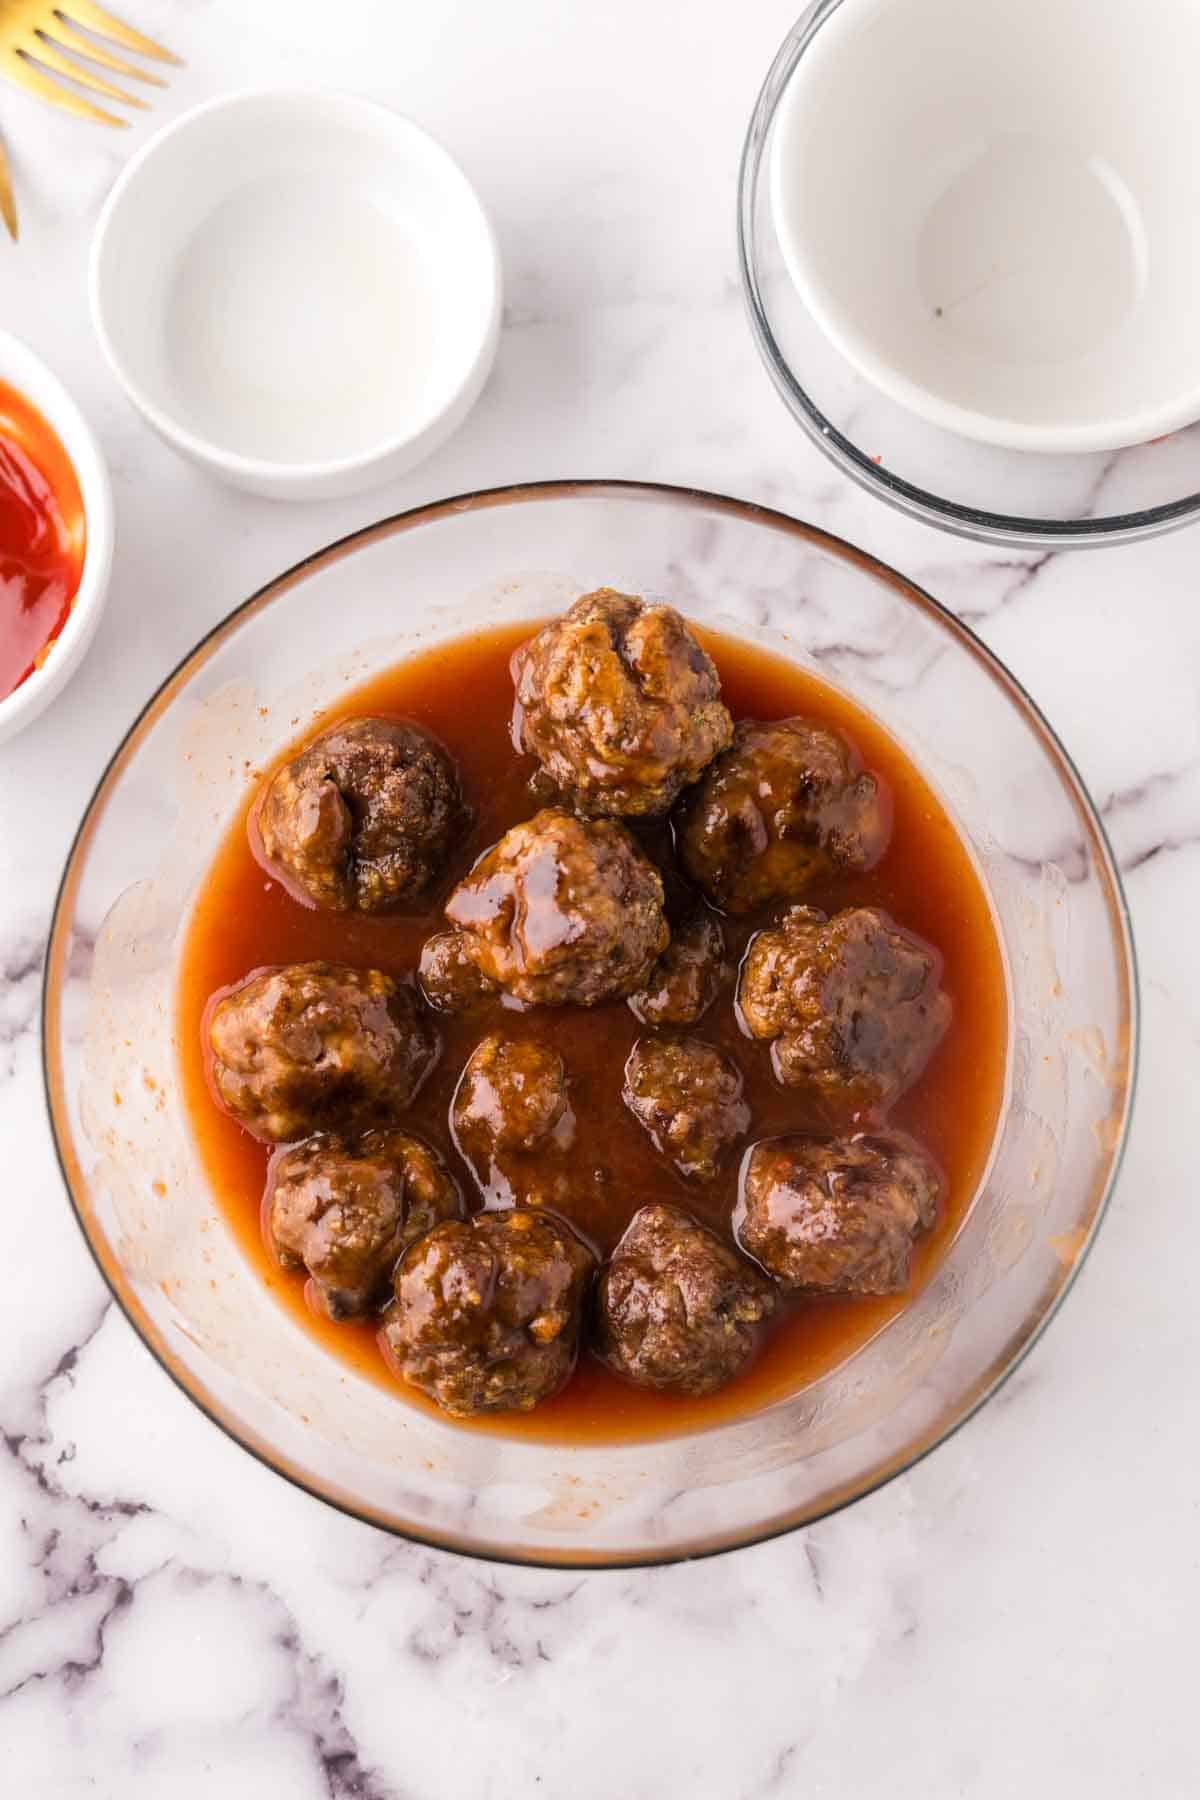 Meatballs in a clear white bowl covered in sweet and sour sauce.